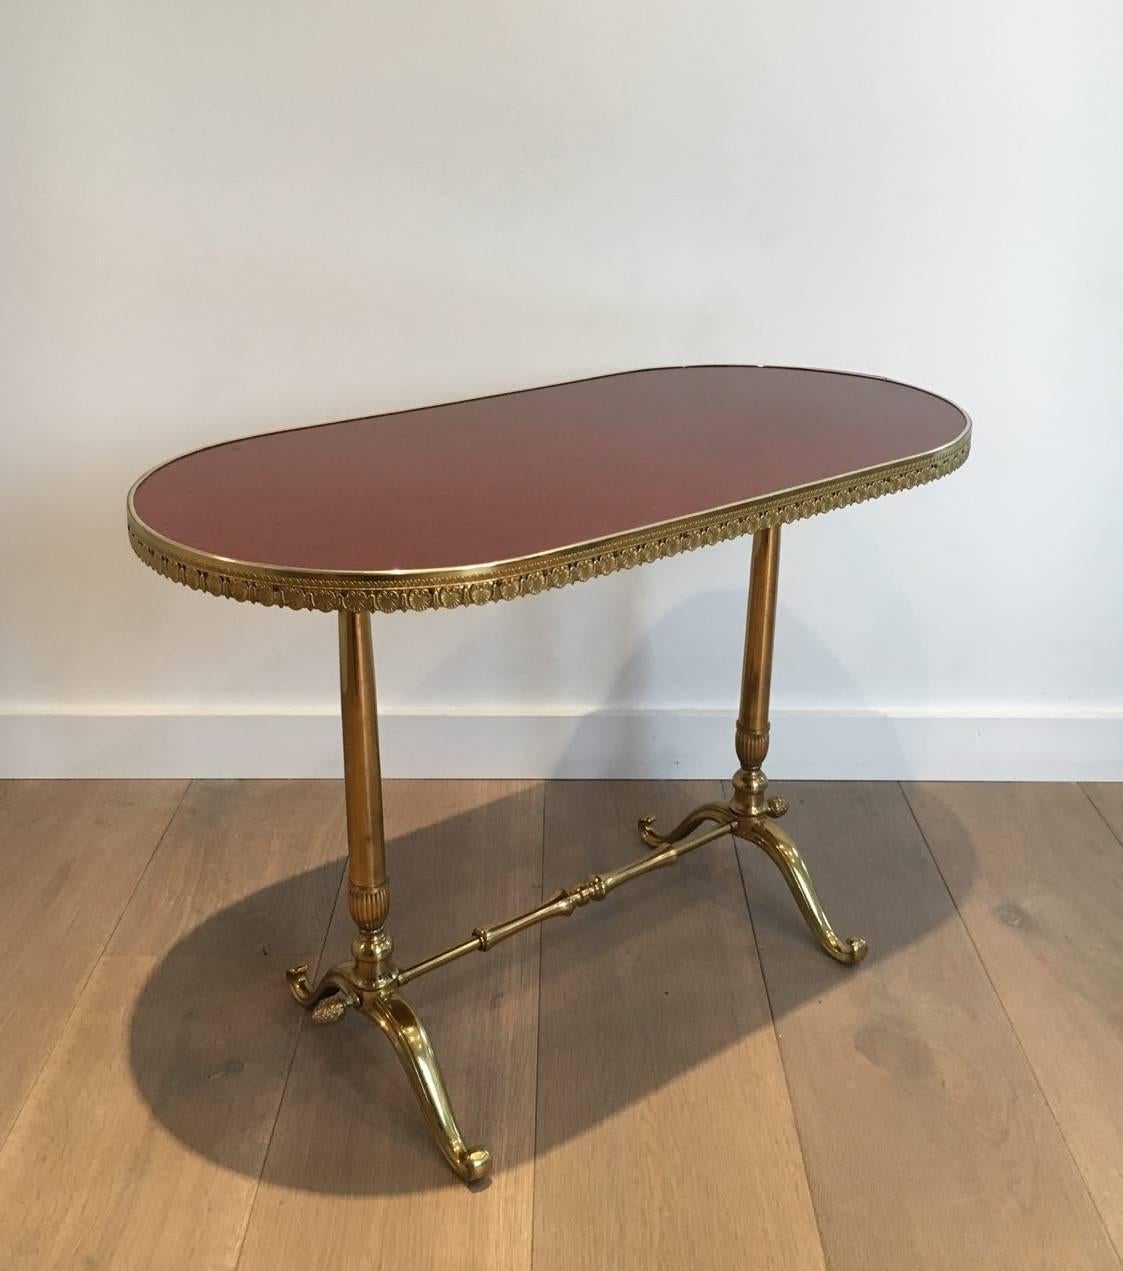 A handsome neoclassical style oval side table, having a brass and bronze base and a lacquered wooden top. The top is finished with a brass gallery decorated with classical Greek motifs. The base has curled feet joined by a turned stretcher and